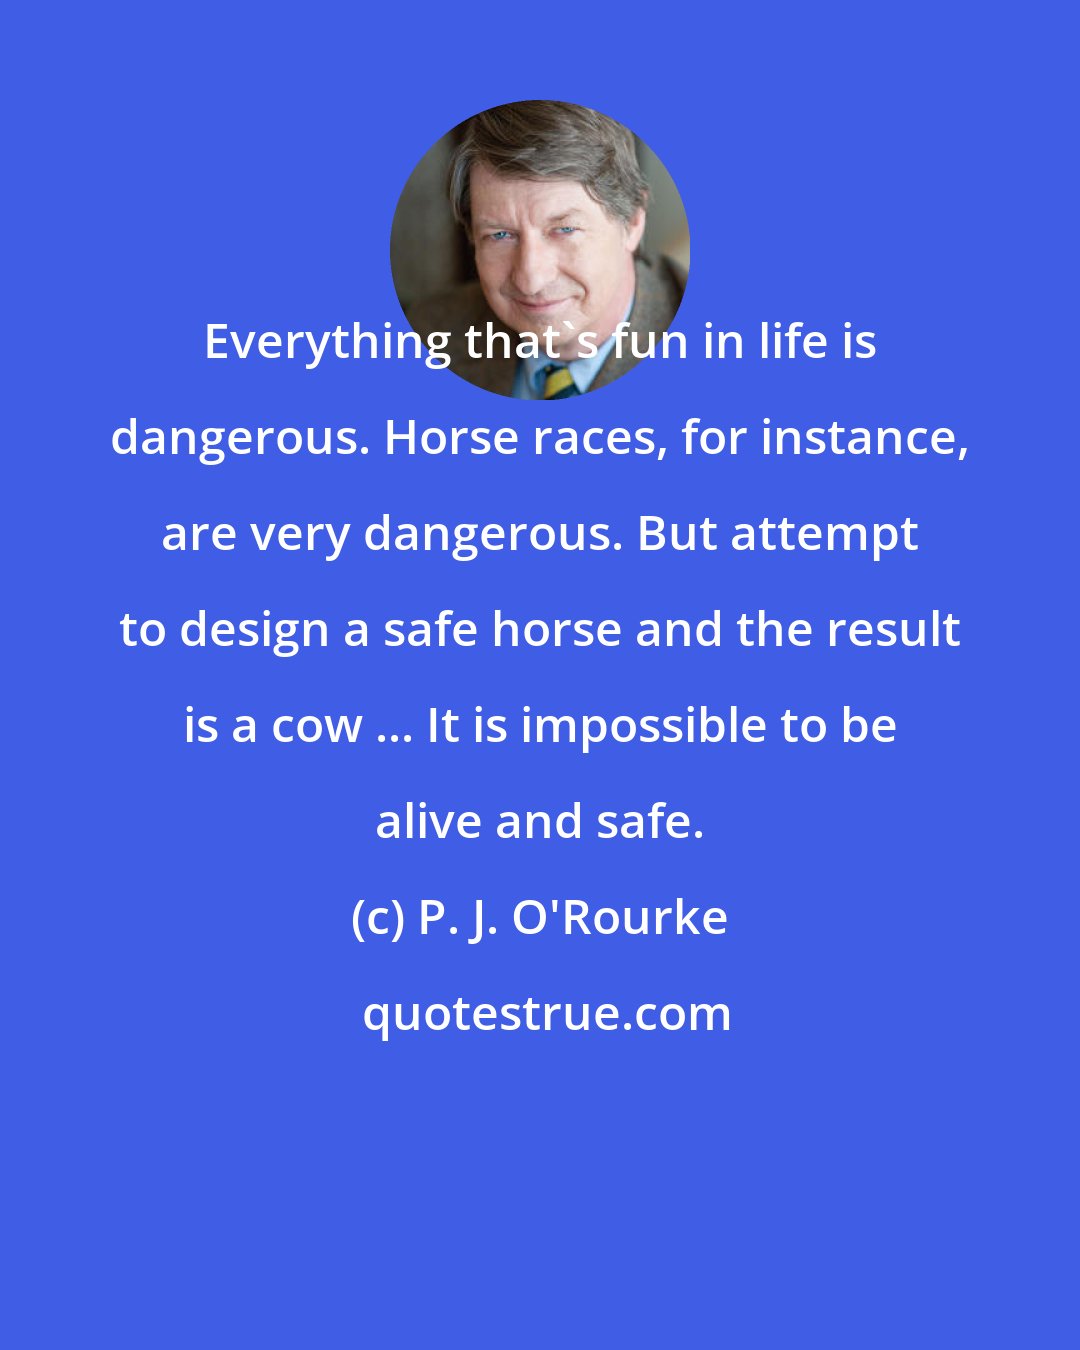 P. J. O'Rourke: Everything that's fun in life is dangerous. Horse races, for instance, are very dangerous. But attempt to design a safe horse and the result is a cow ... It is impossible to be alive and safe.